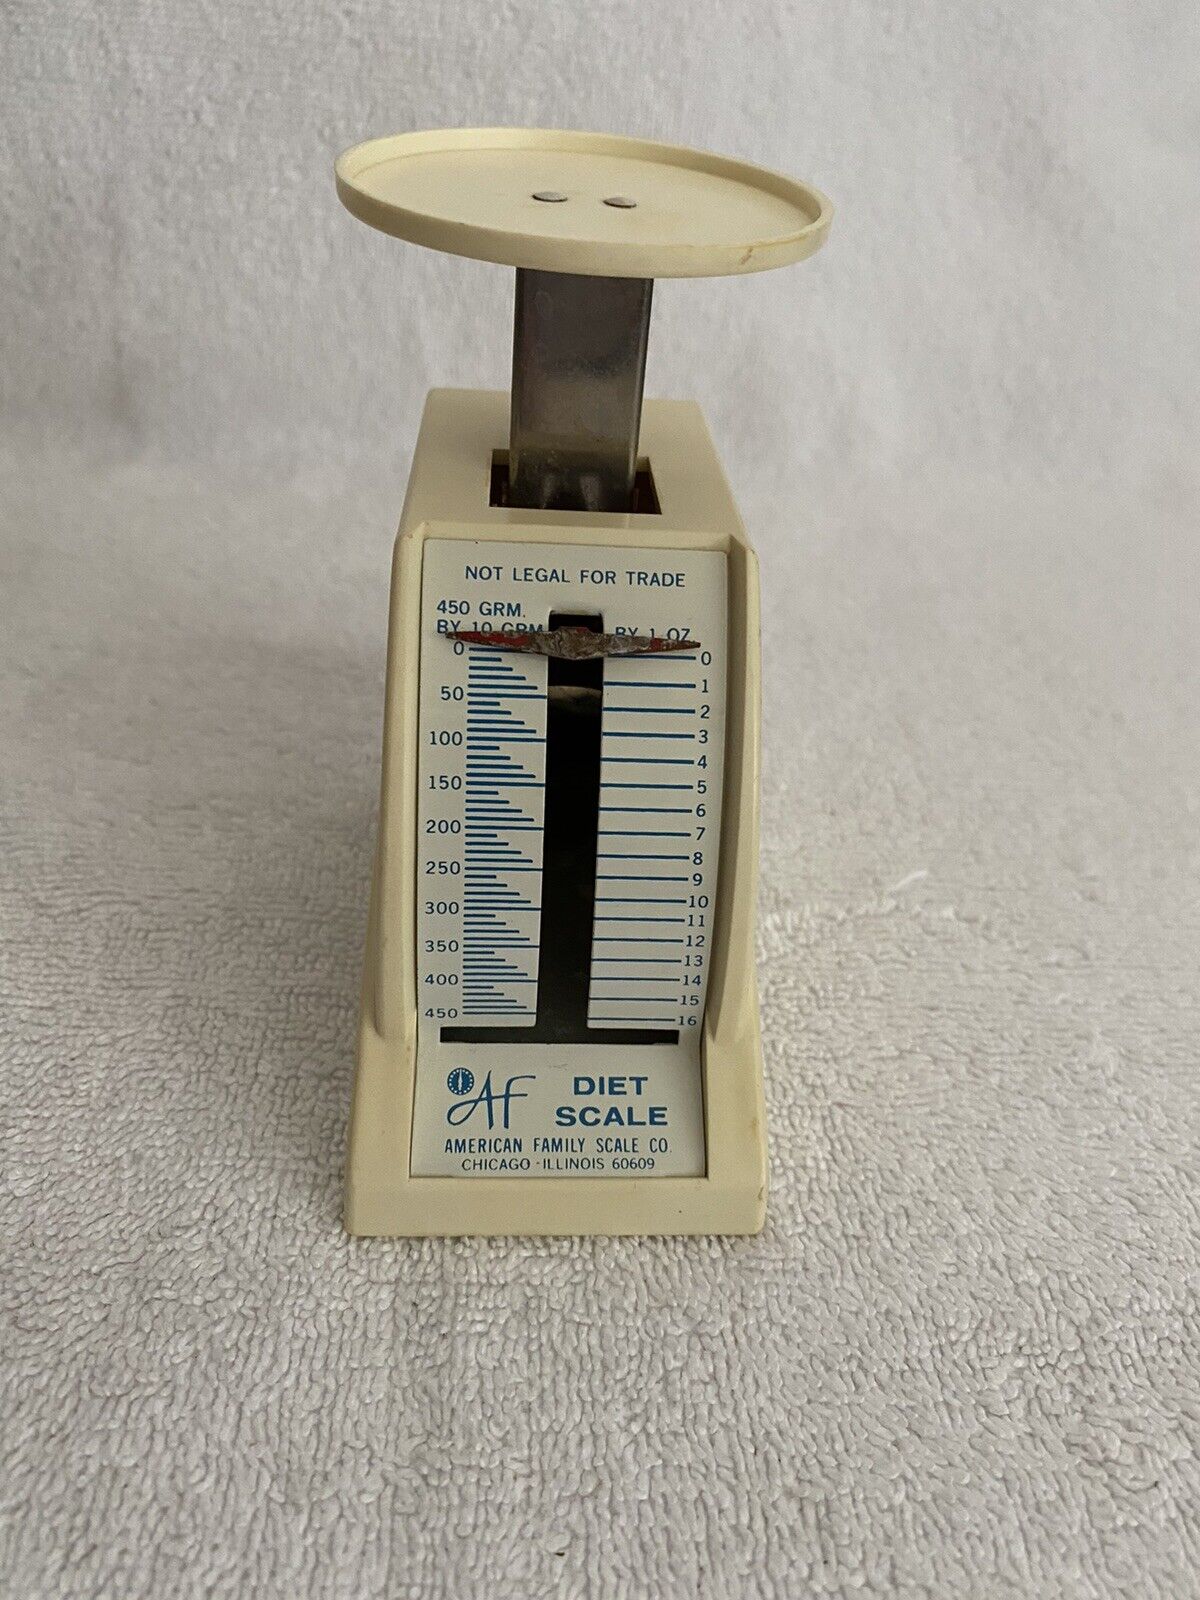 Vintage American Family AF Diet Weight Scale - Chicago, IL - Works Great